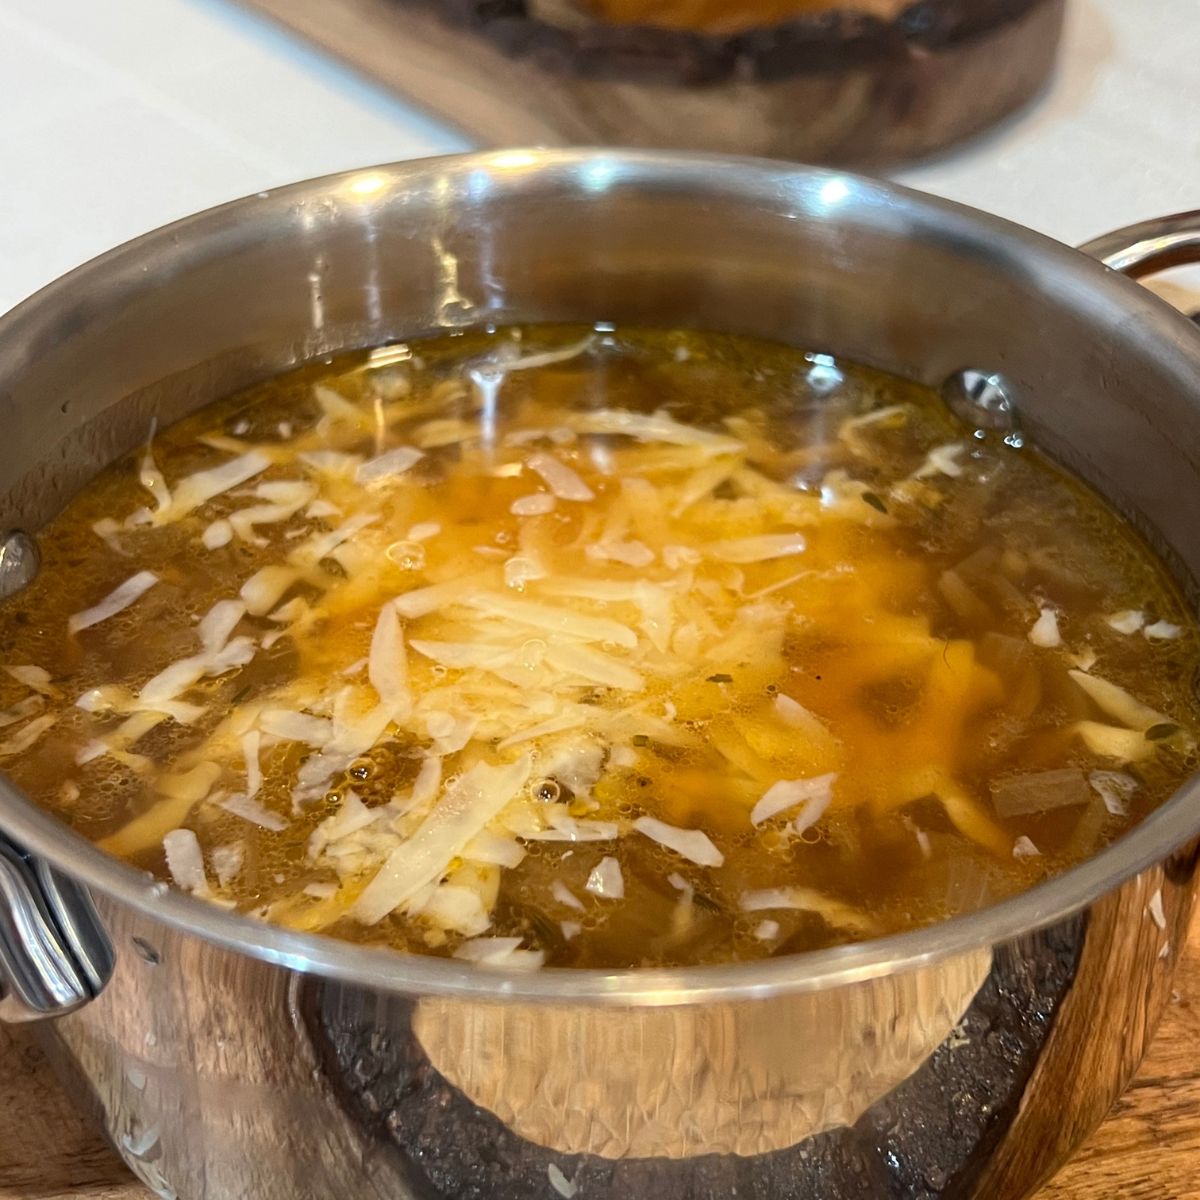 Healthy crockpot French onion soup in a stainless steel bowl